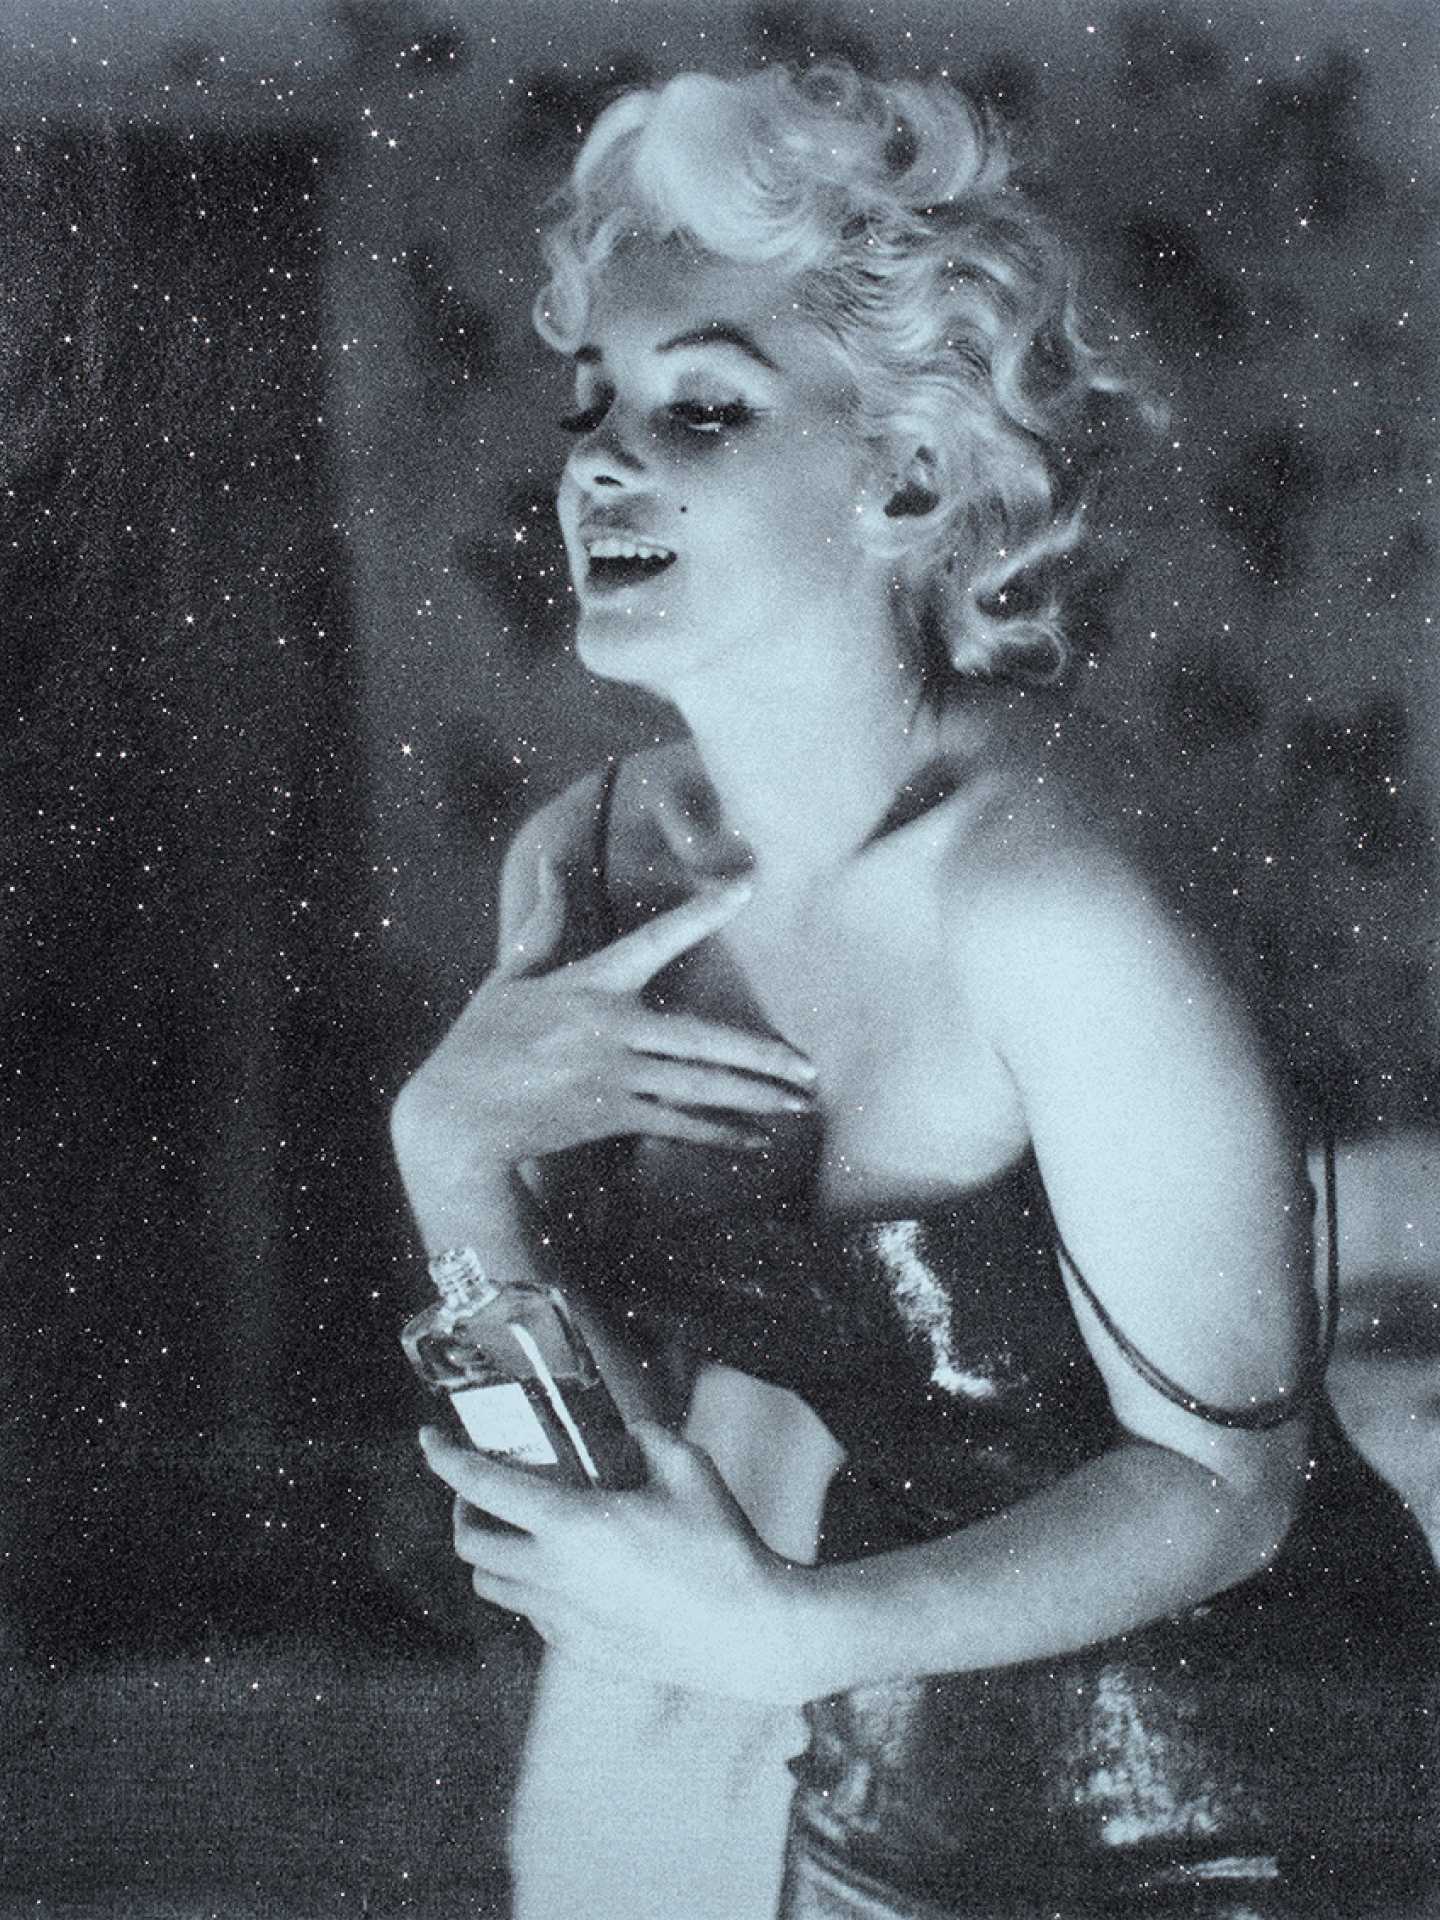 Russell Young, Marilyn Monroe portraits